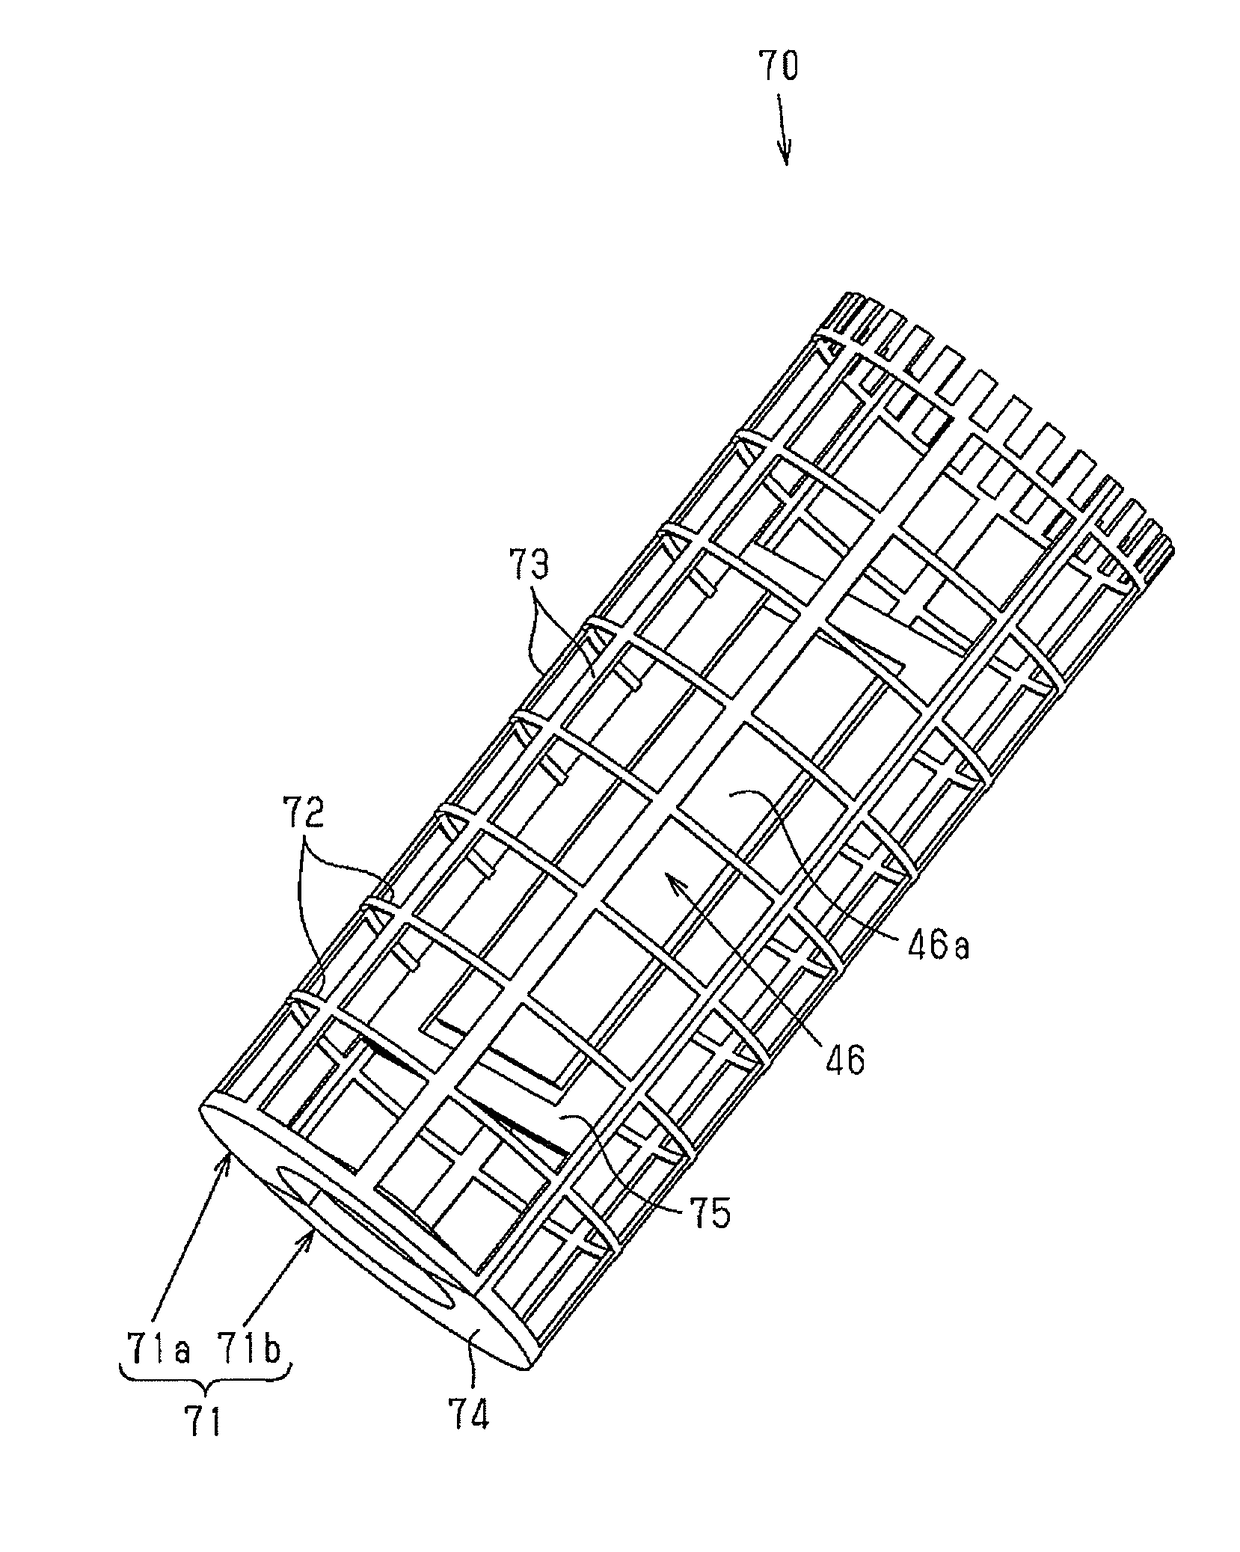 Tubular air cleaner for internal combustion engine and tubular filter element